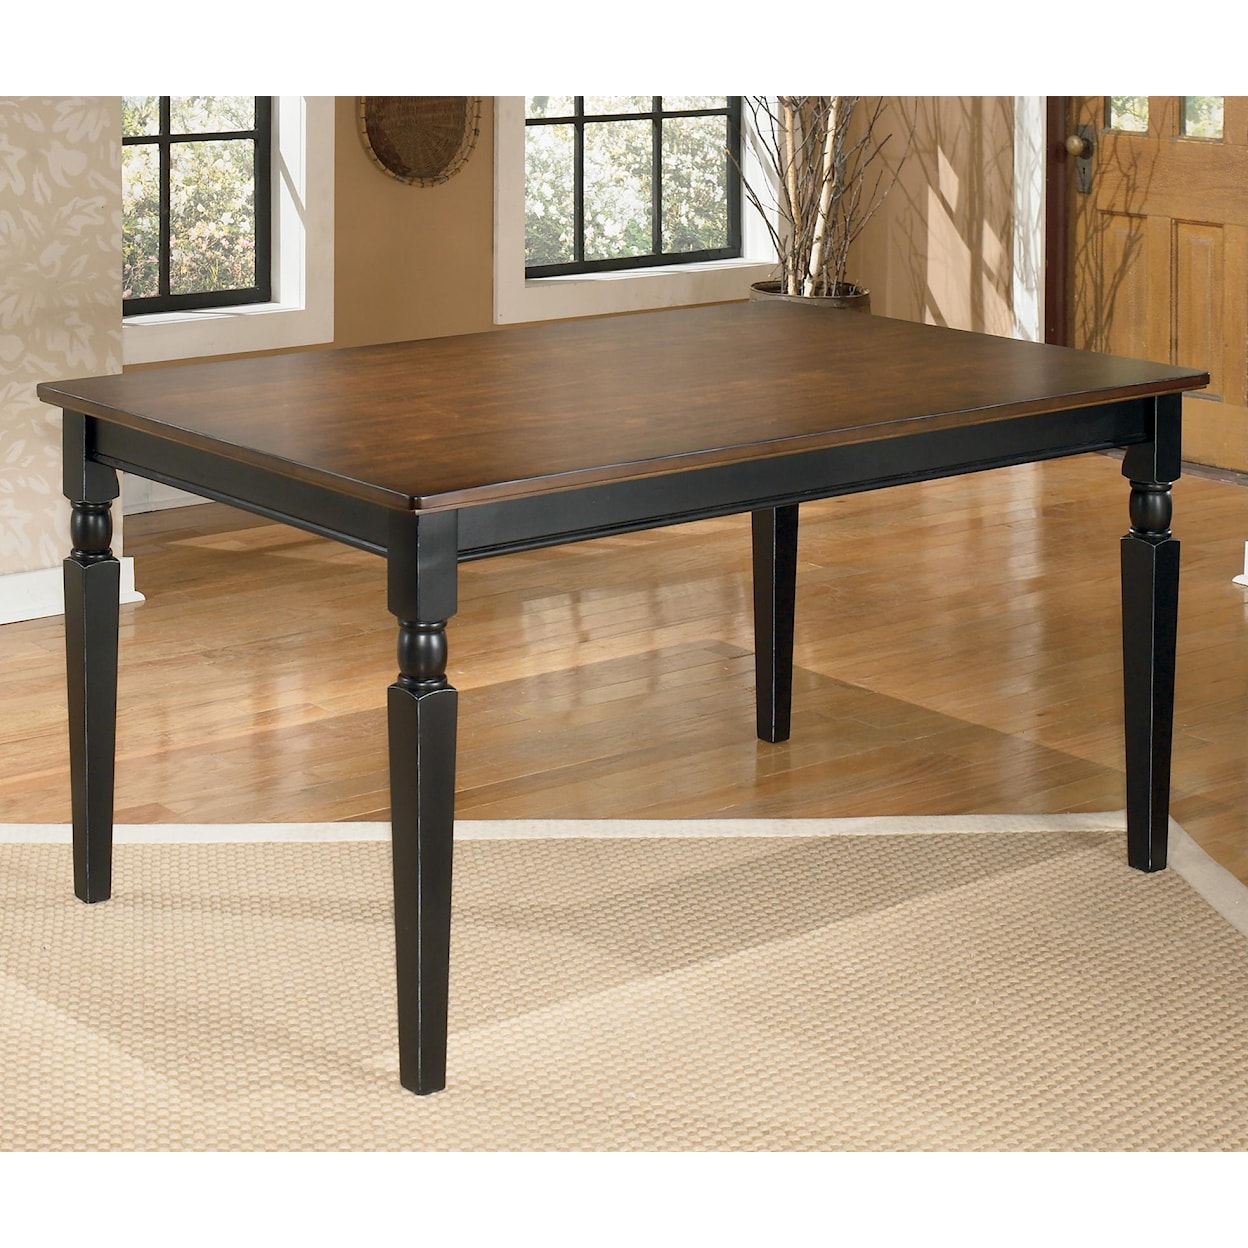 Signature Design by Ashley Furniture Owingsville Rectangular Dining Room Table